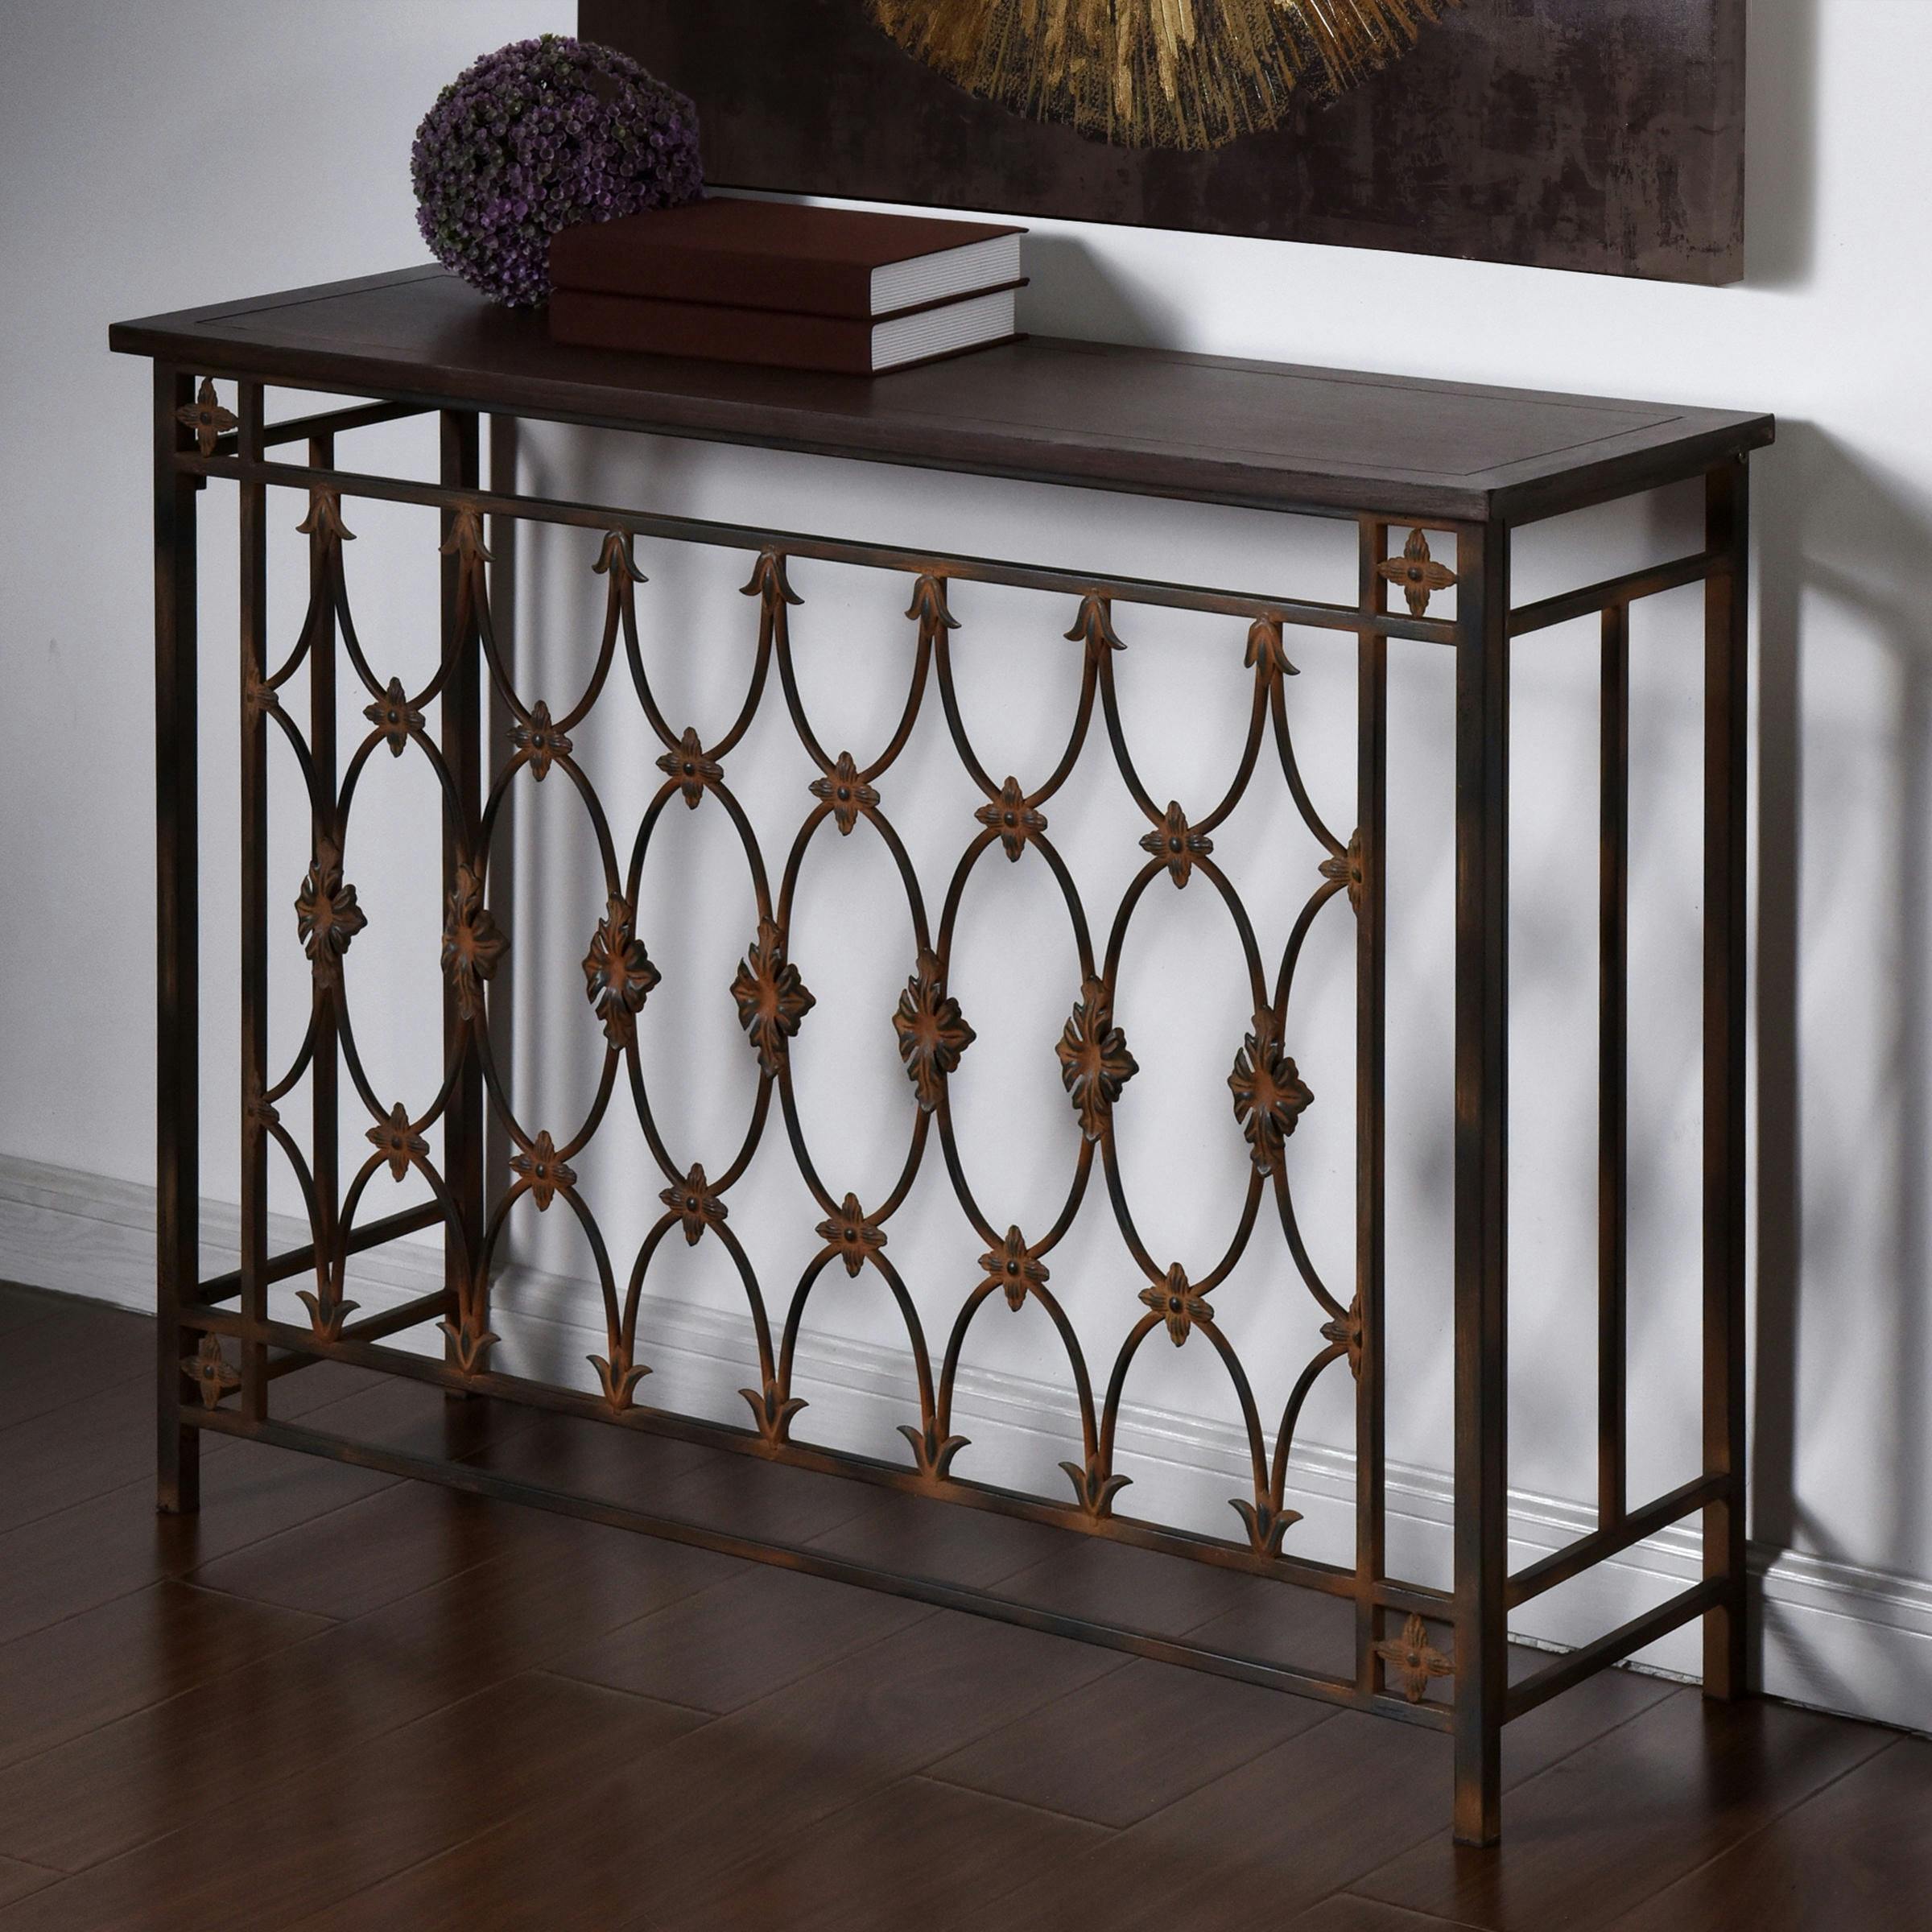 Exquisite Filagree Brown Metal and Wood Rectangular Side Table